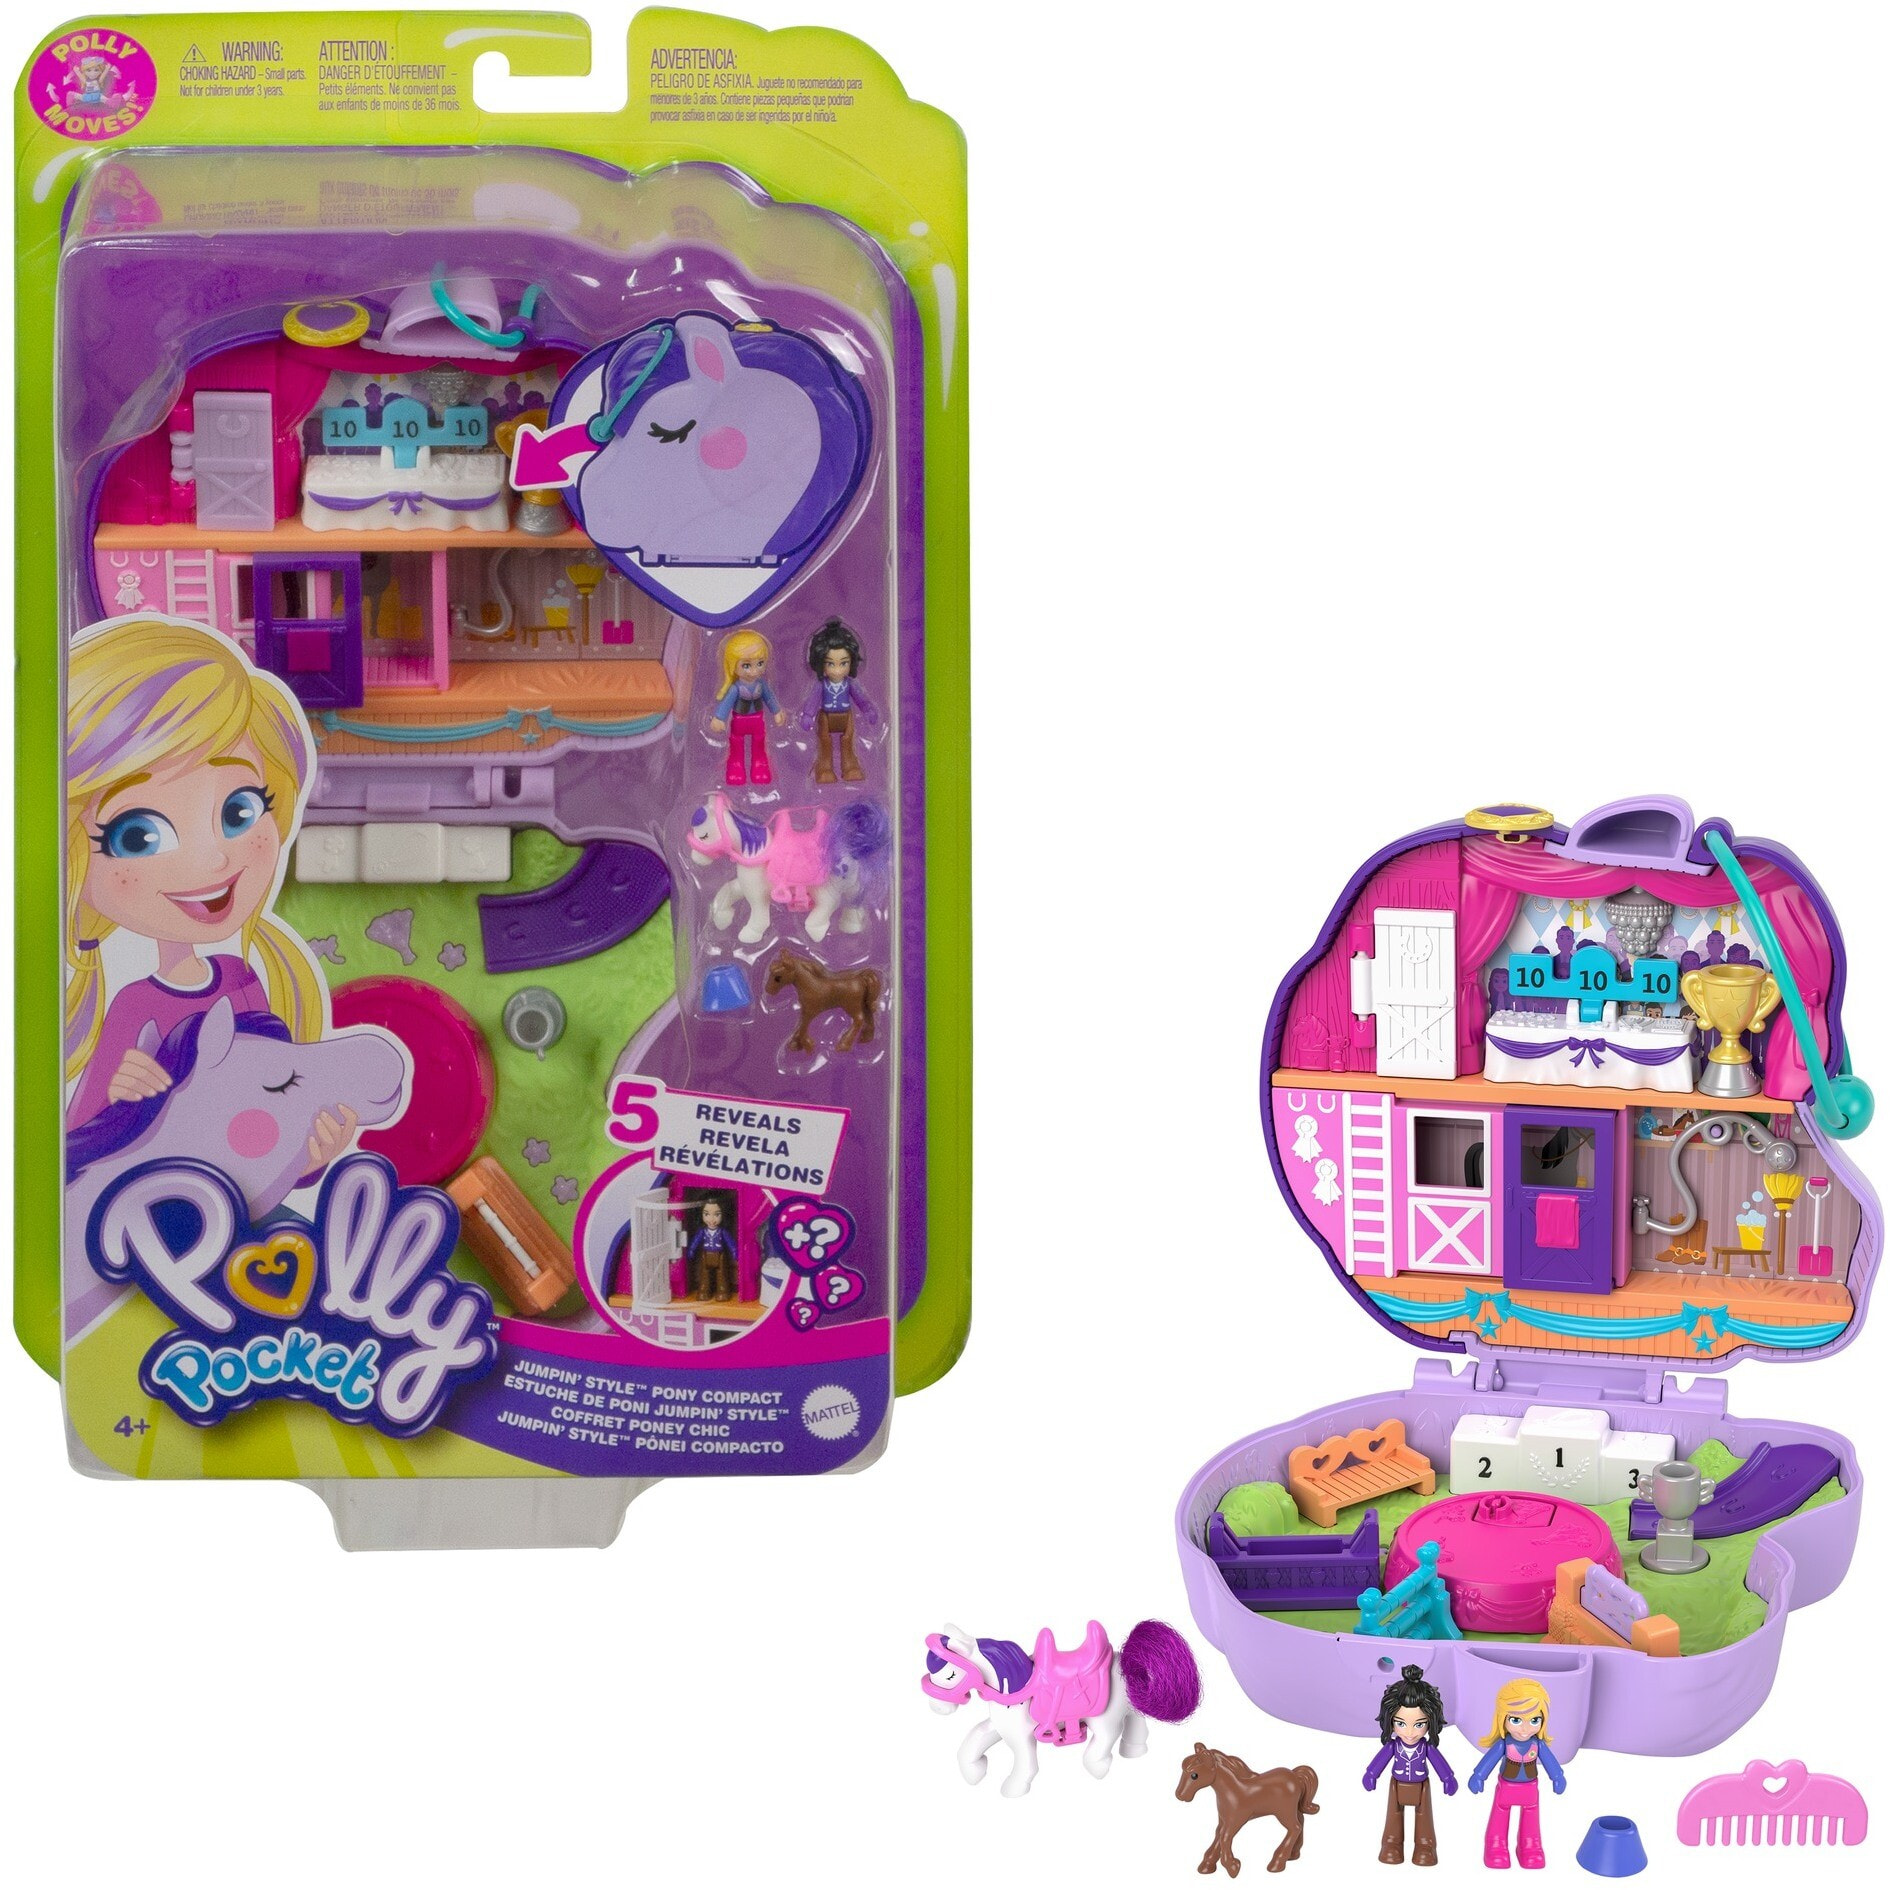 Детский игровой набор и фигурка из дерева Polly Pocket Jumpin’ Style Pony Compact with Horse Show Theme, Micro Polly Doll & Friend, 2 Horse Figures (1 with Saddle & Tail Hair), Fun Features & Surprise Reveals, Great Gift for Ages 4 & Up